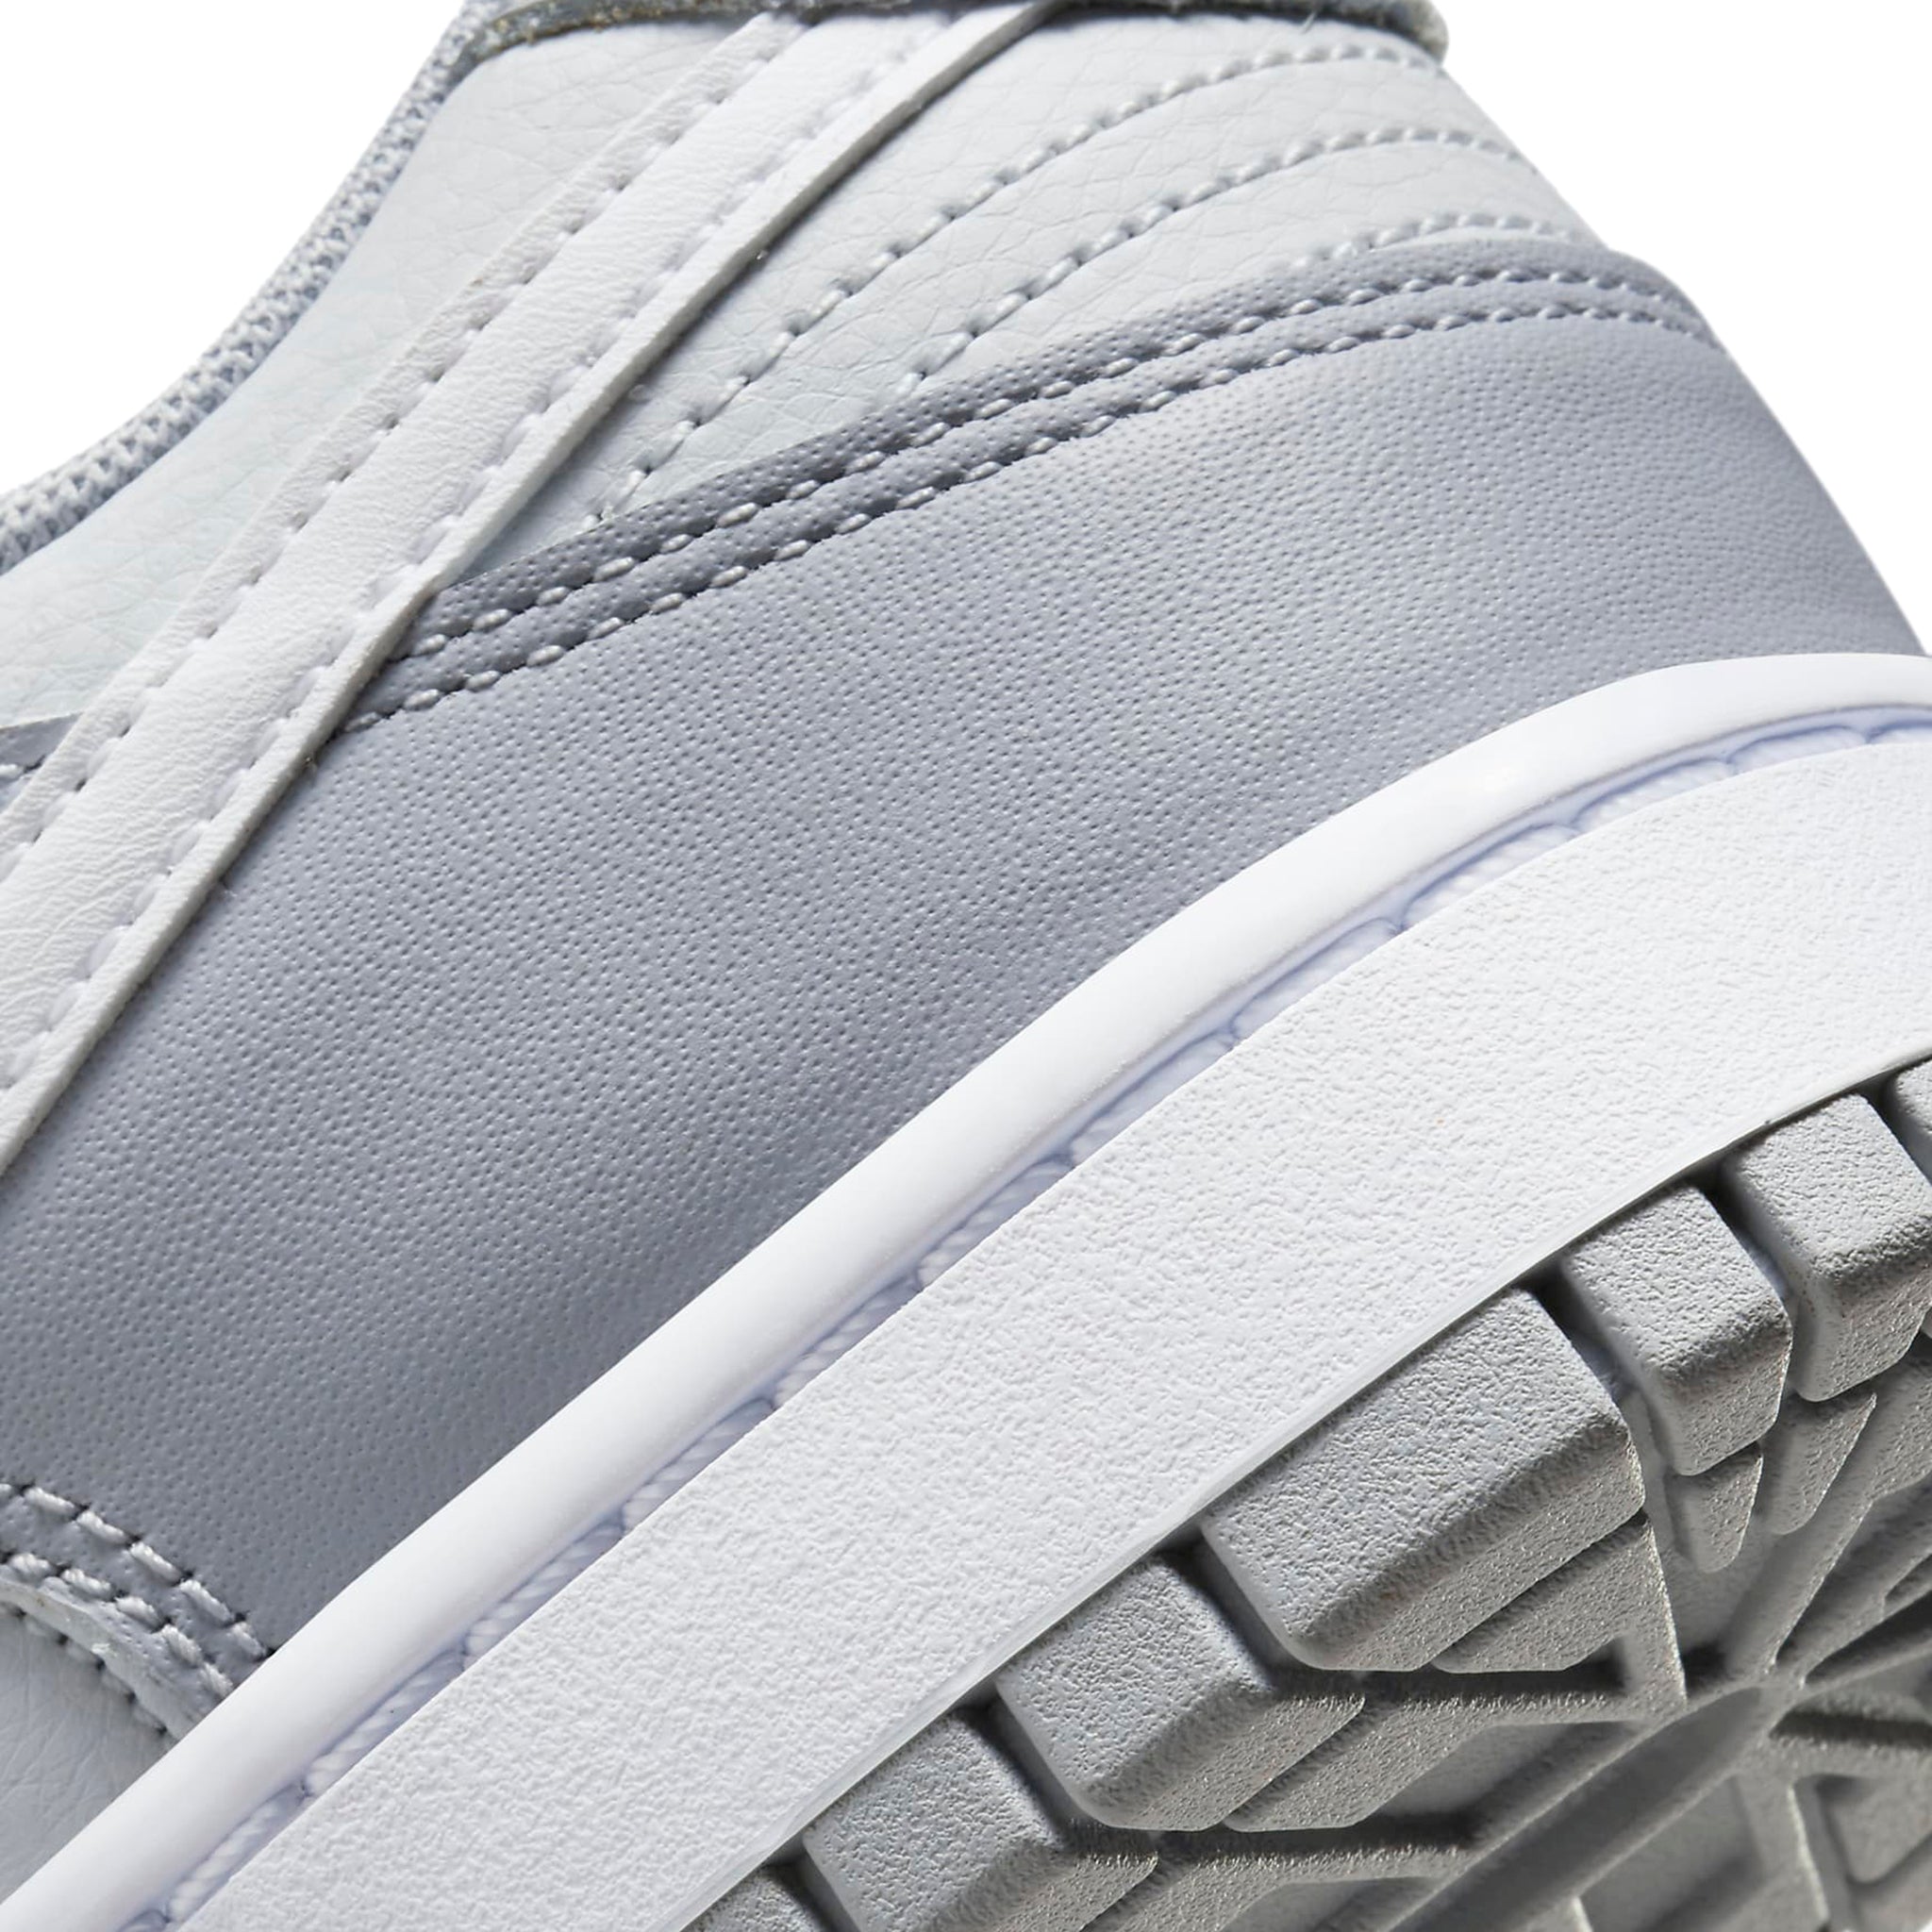 Back view of Nike Dunk Low Two Tone Grey DJ6188-001